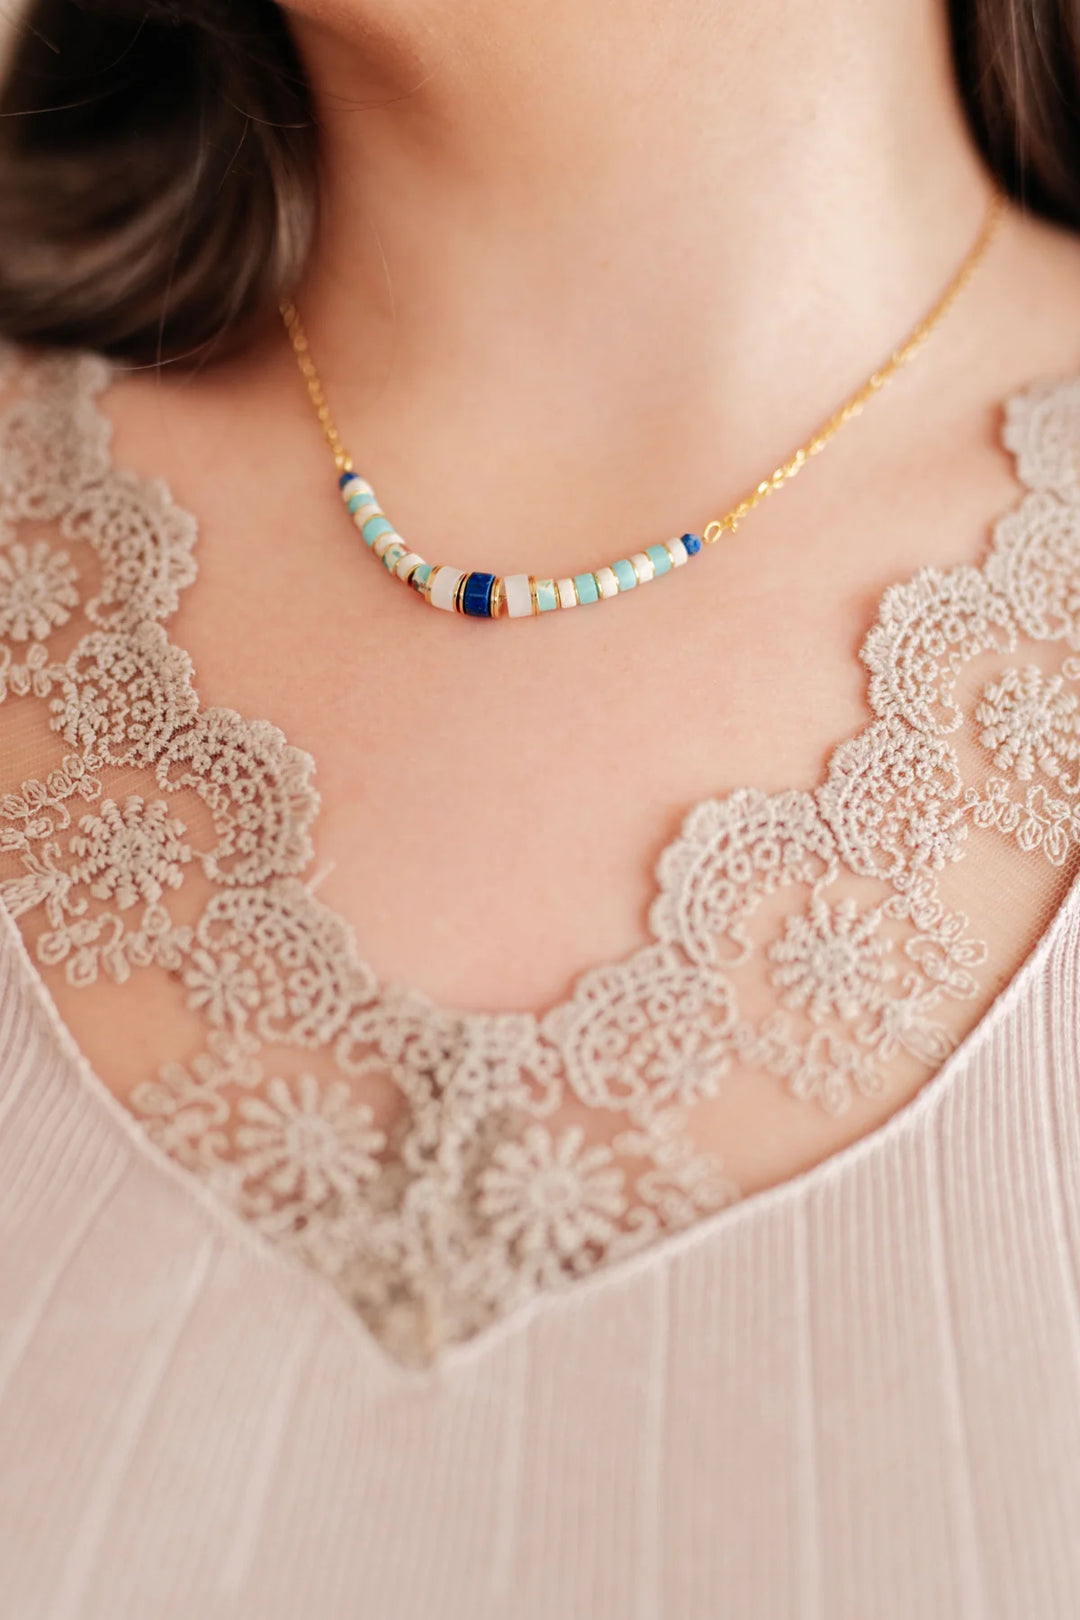 Gold and Bead Necklace - Inspired Eye Boutique